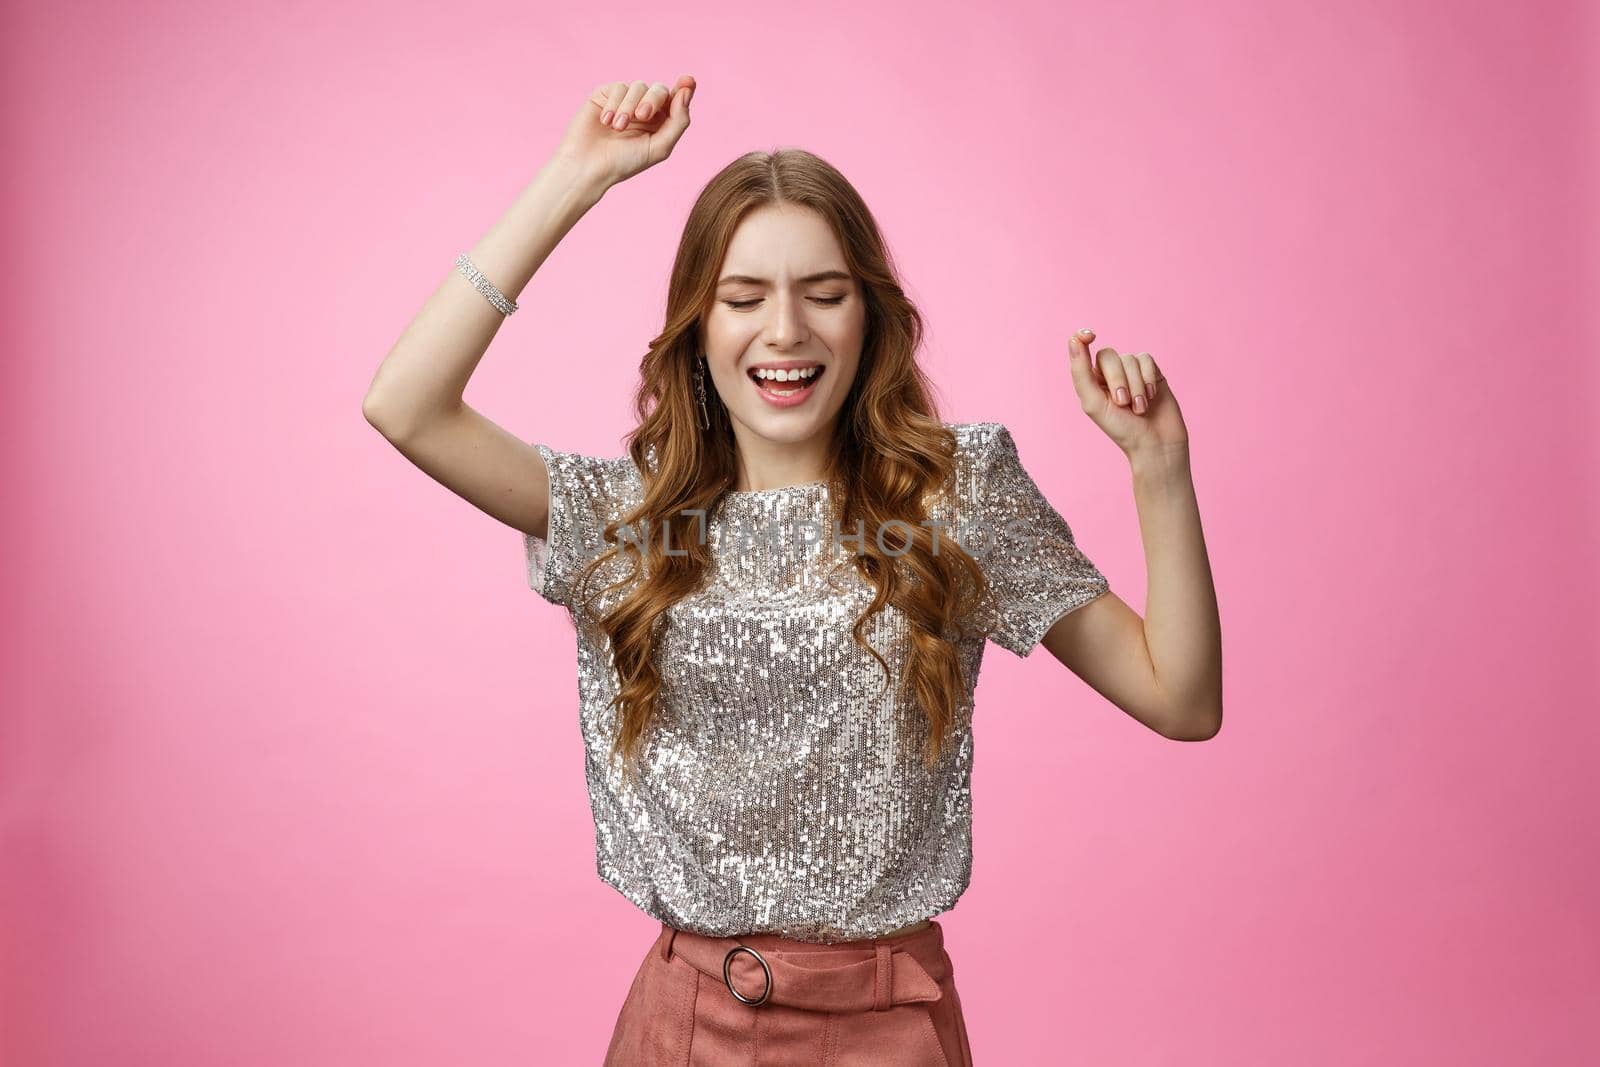 Attractive glamour female dancing dance-floor having fun rase hands up sky close eyes singing along songs enjoying awesome party cool music, wearing glittering blouse trendy skirt, pink background.